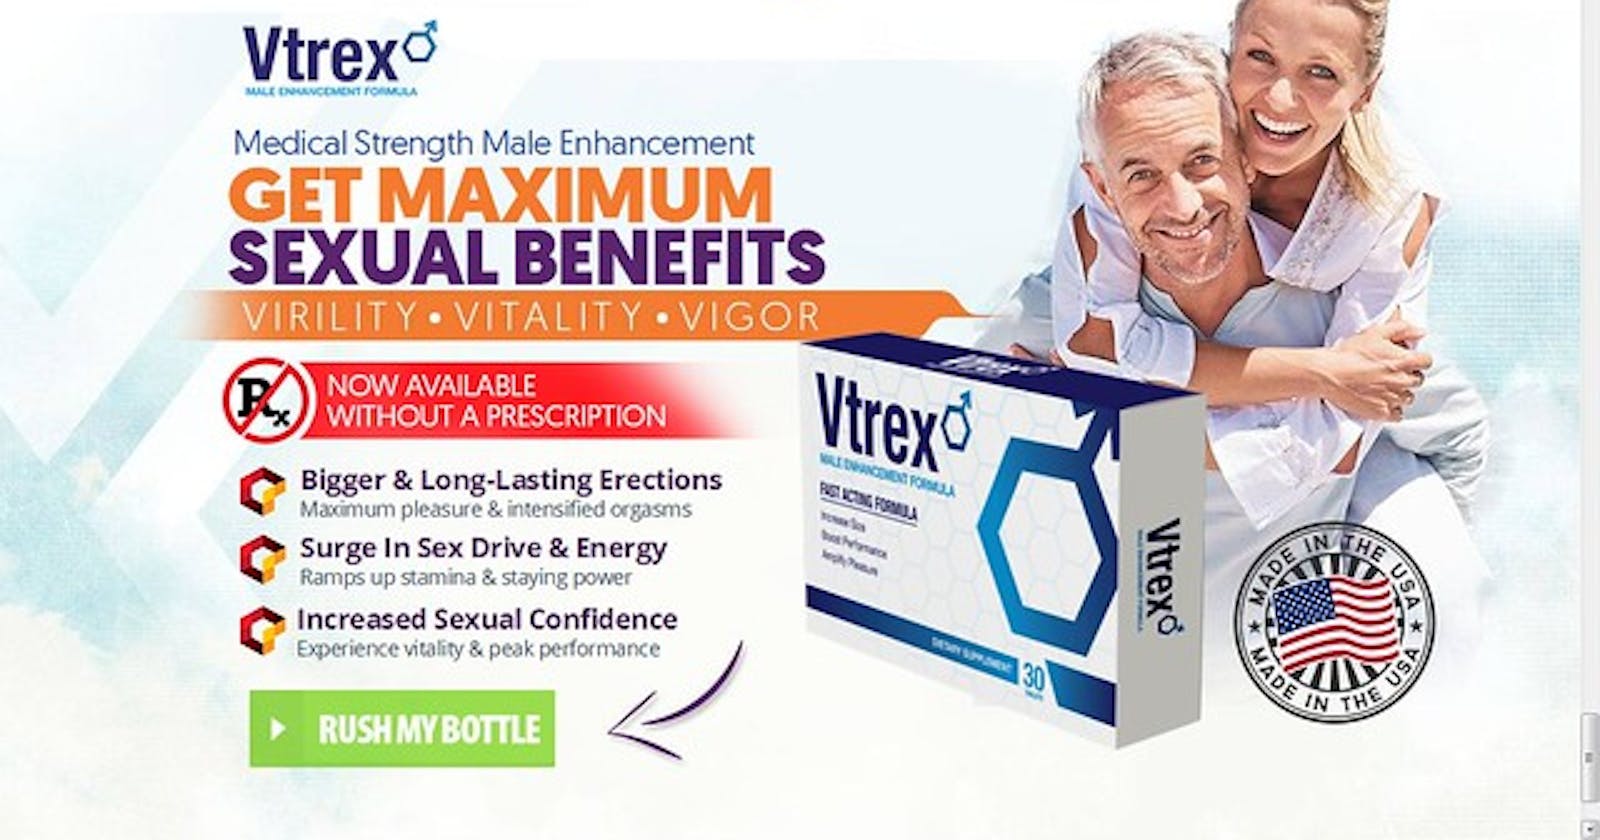 Vtrex Male Enhancement Ingredients, Price & Where to Buy?